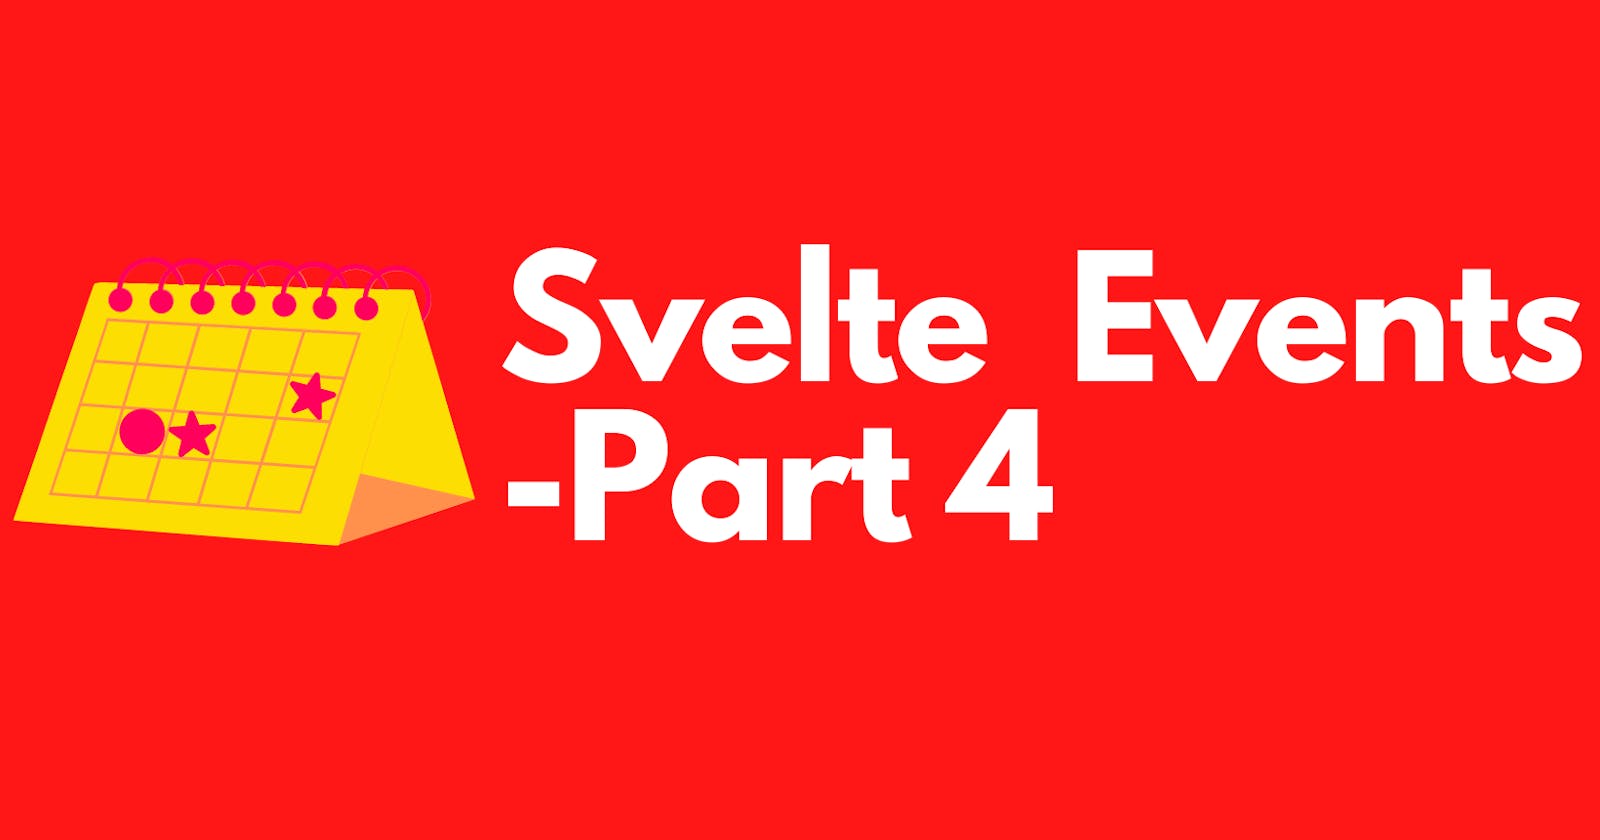 Events in Svelte